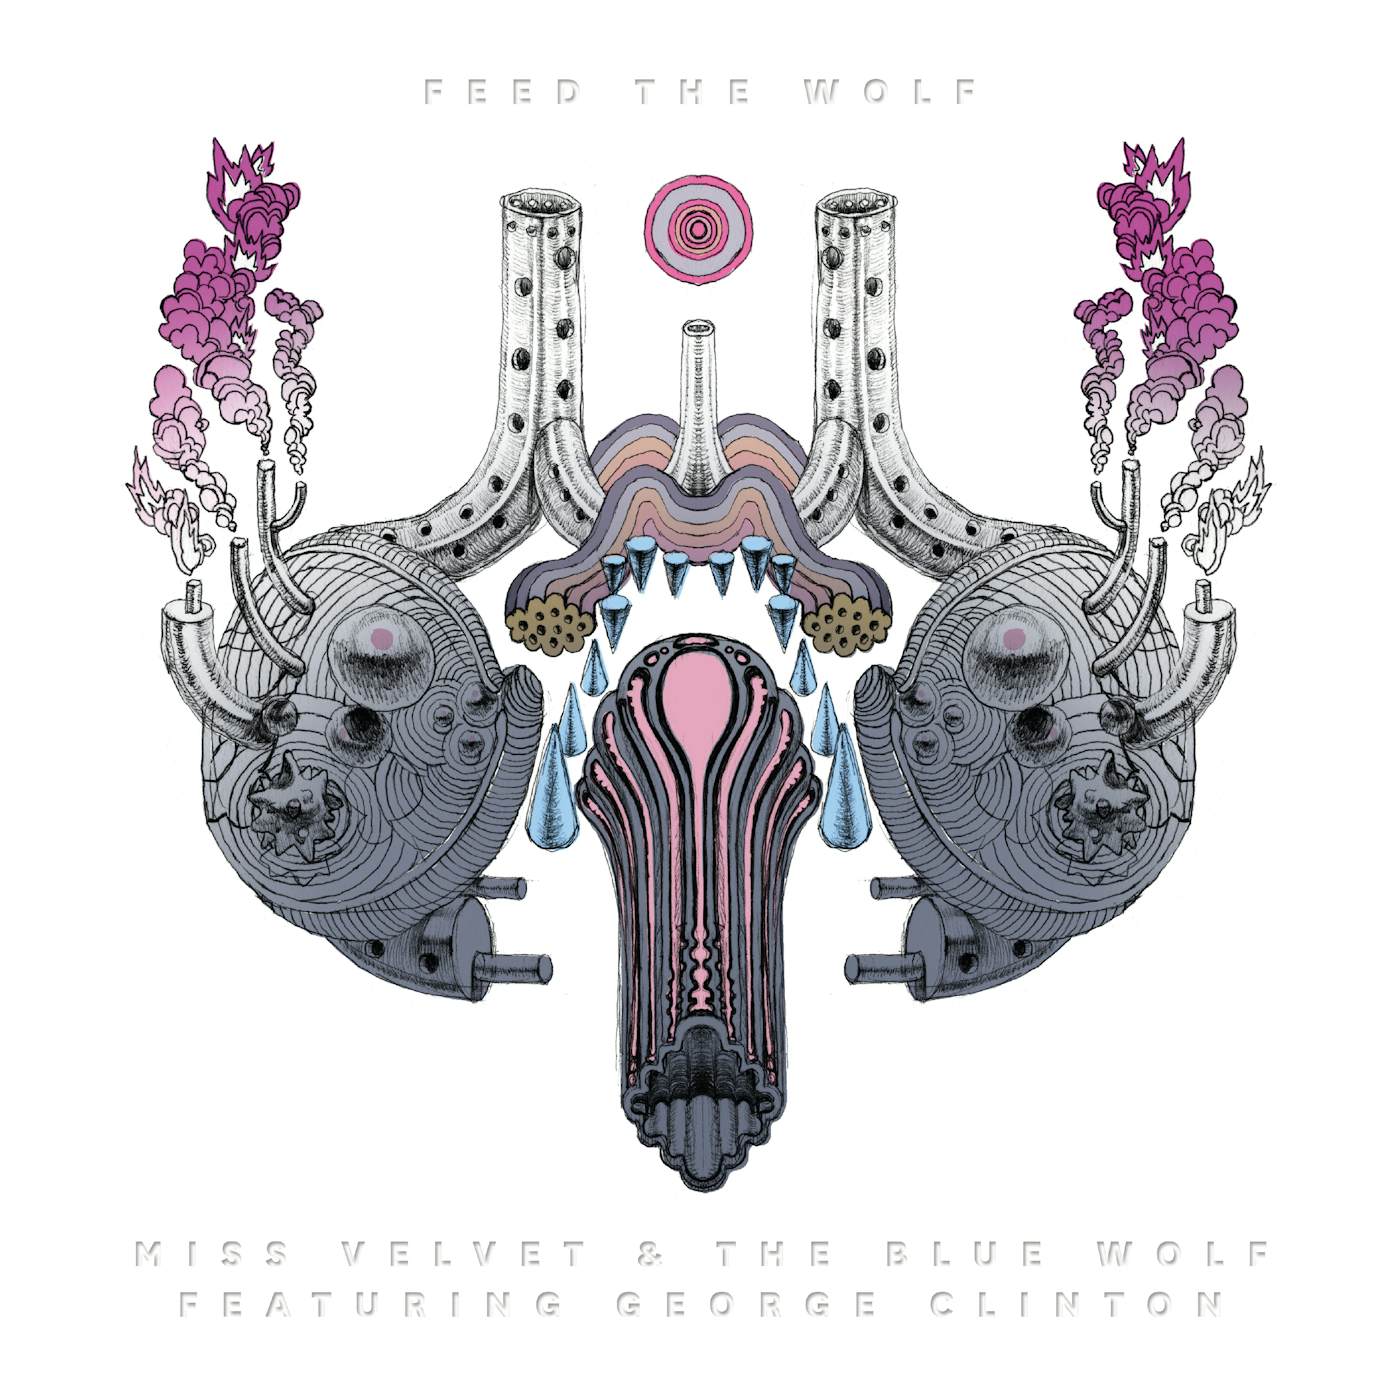 Feed The Wolf / Various FEED THE WOLF CD